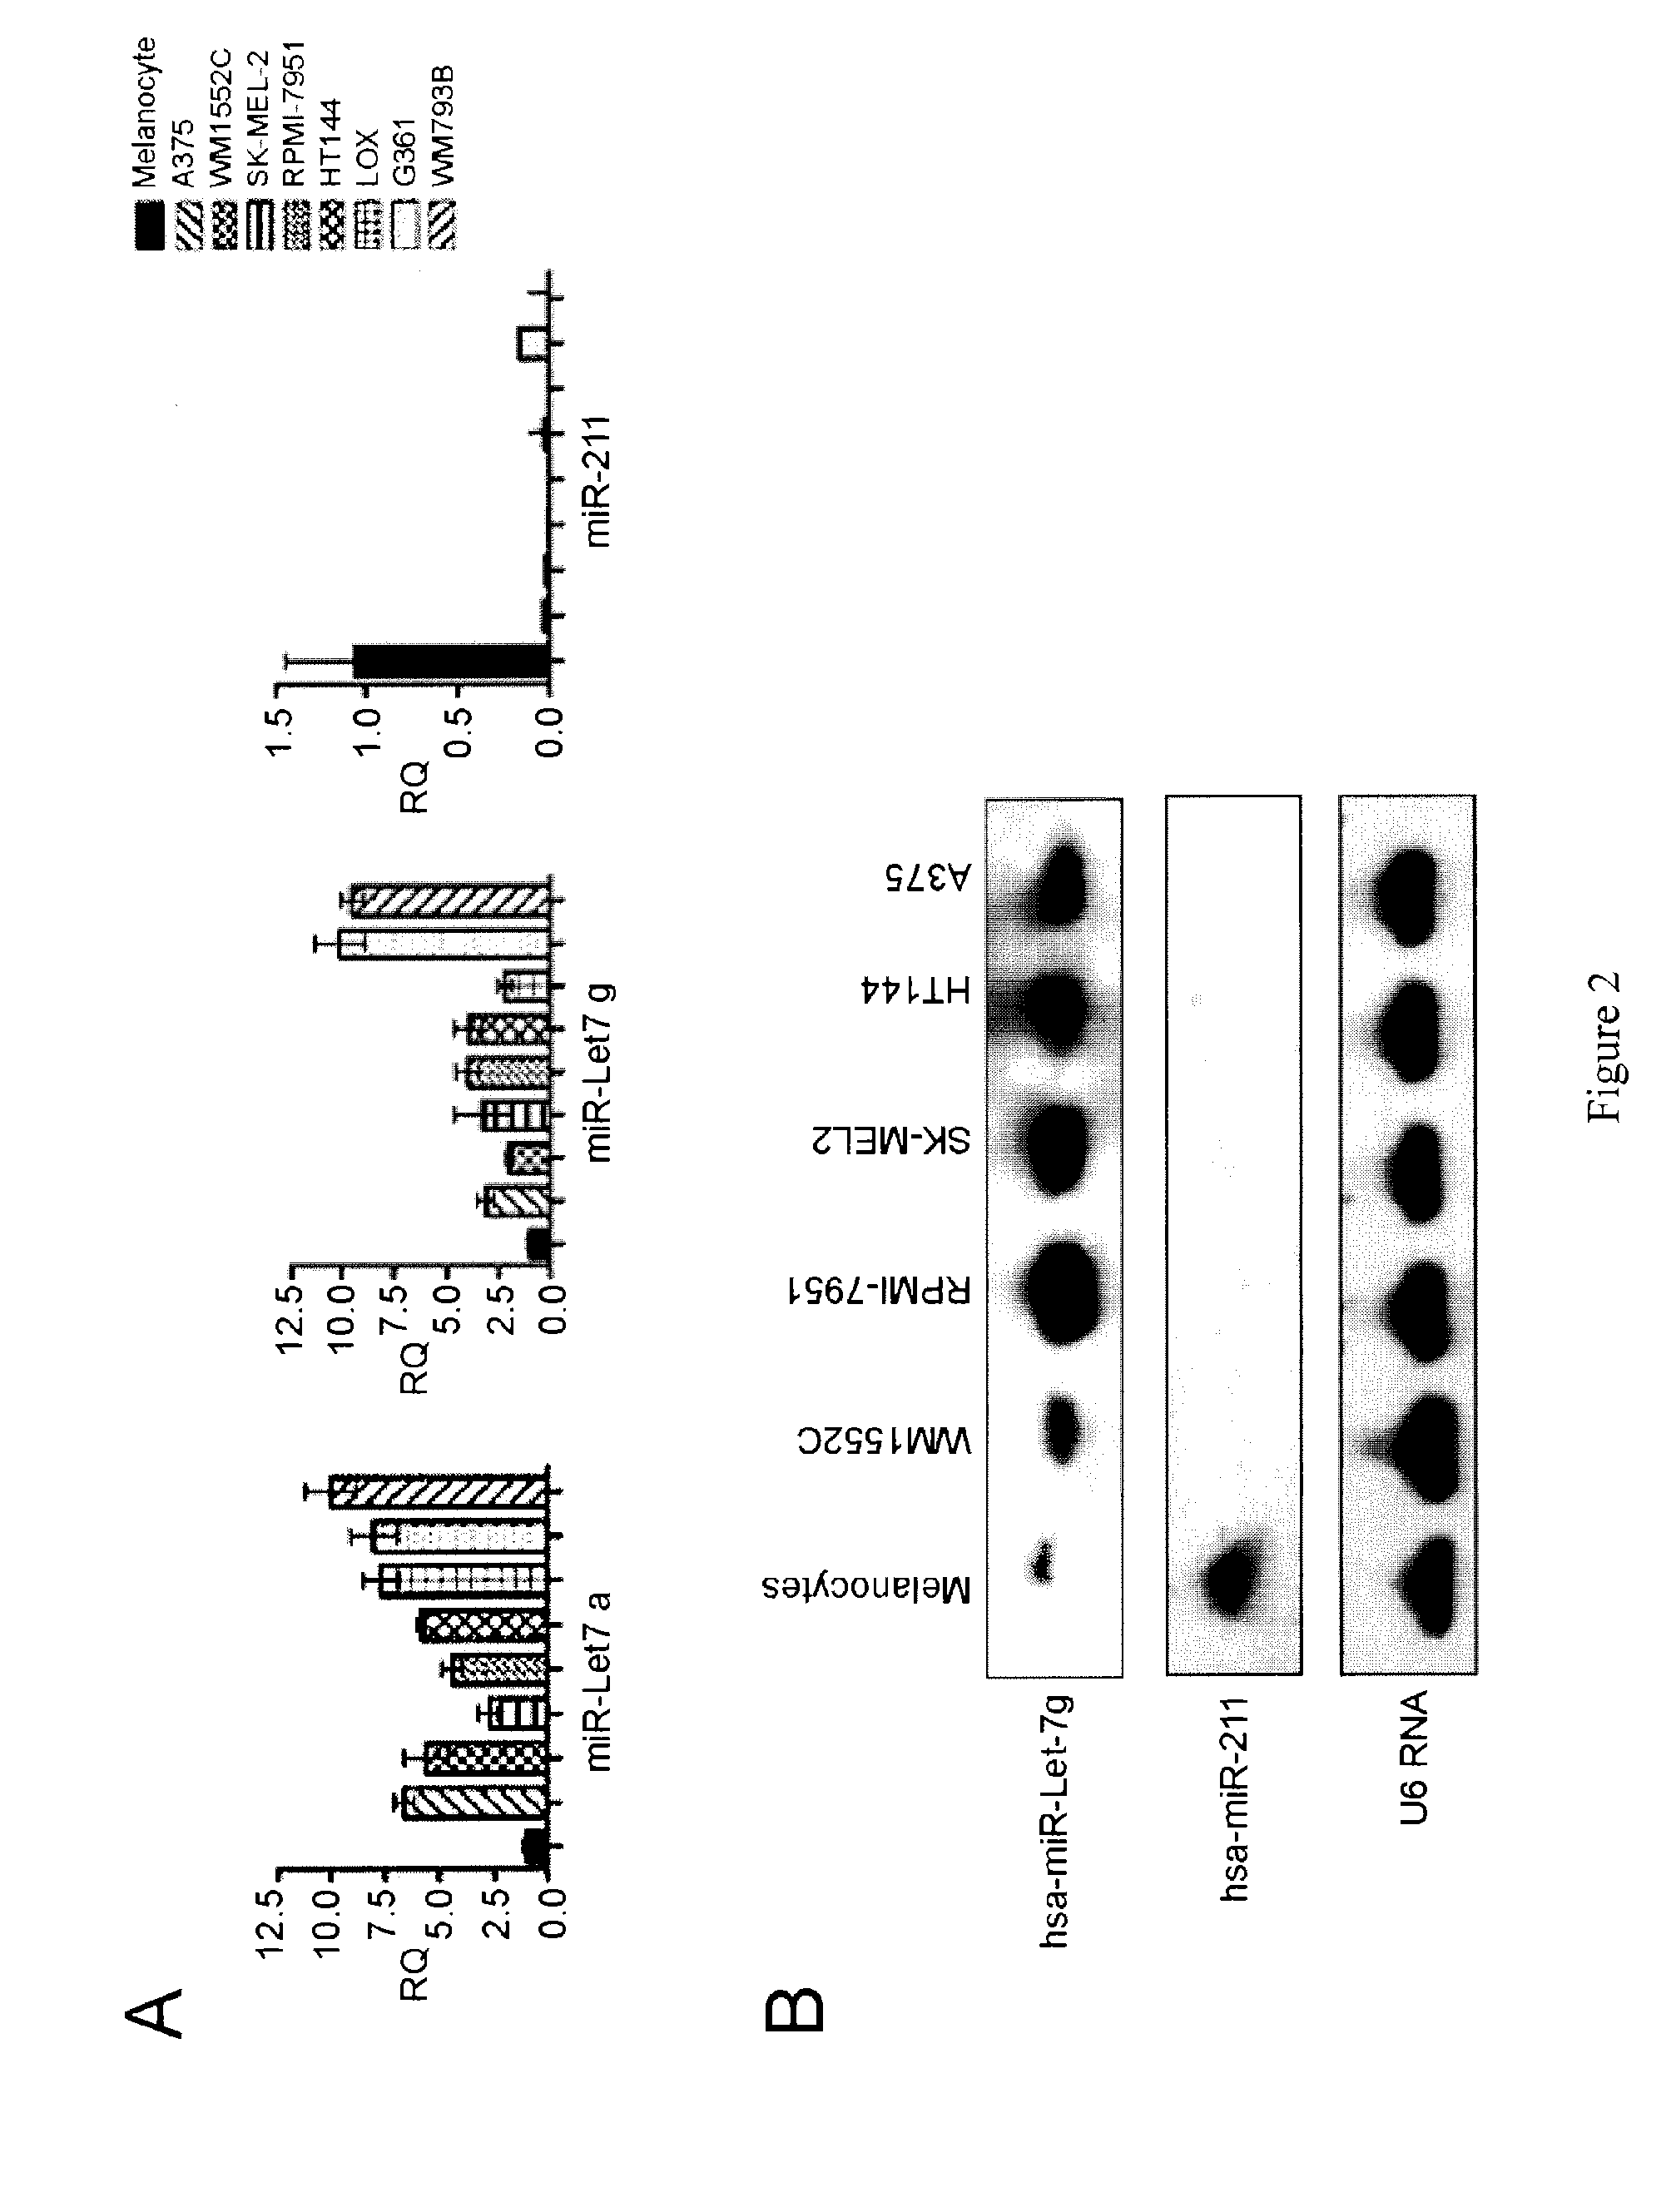 Mir-211 expression and related pathways in human melanoma